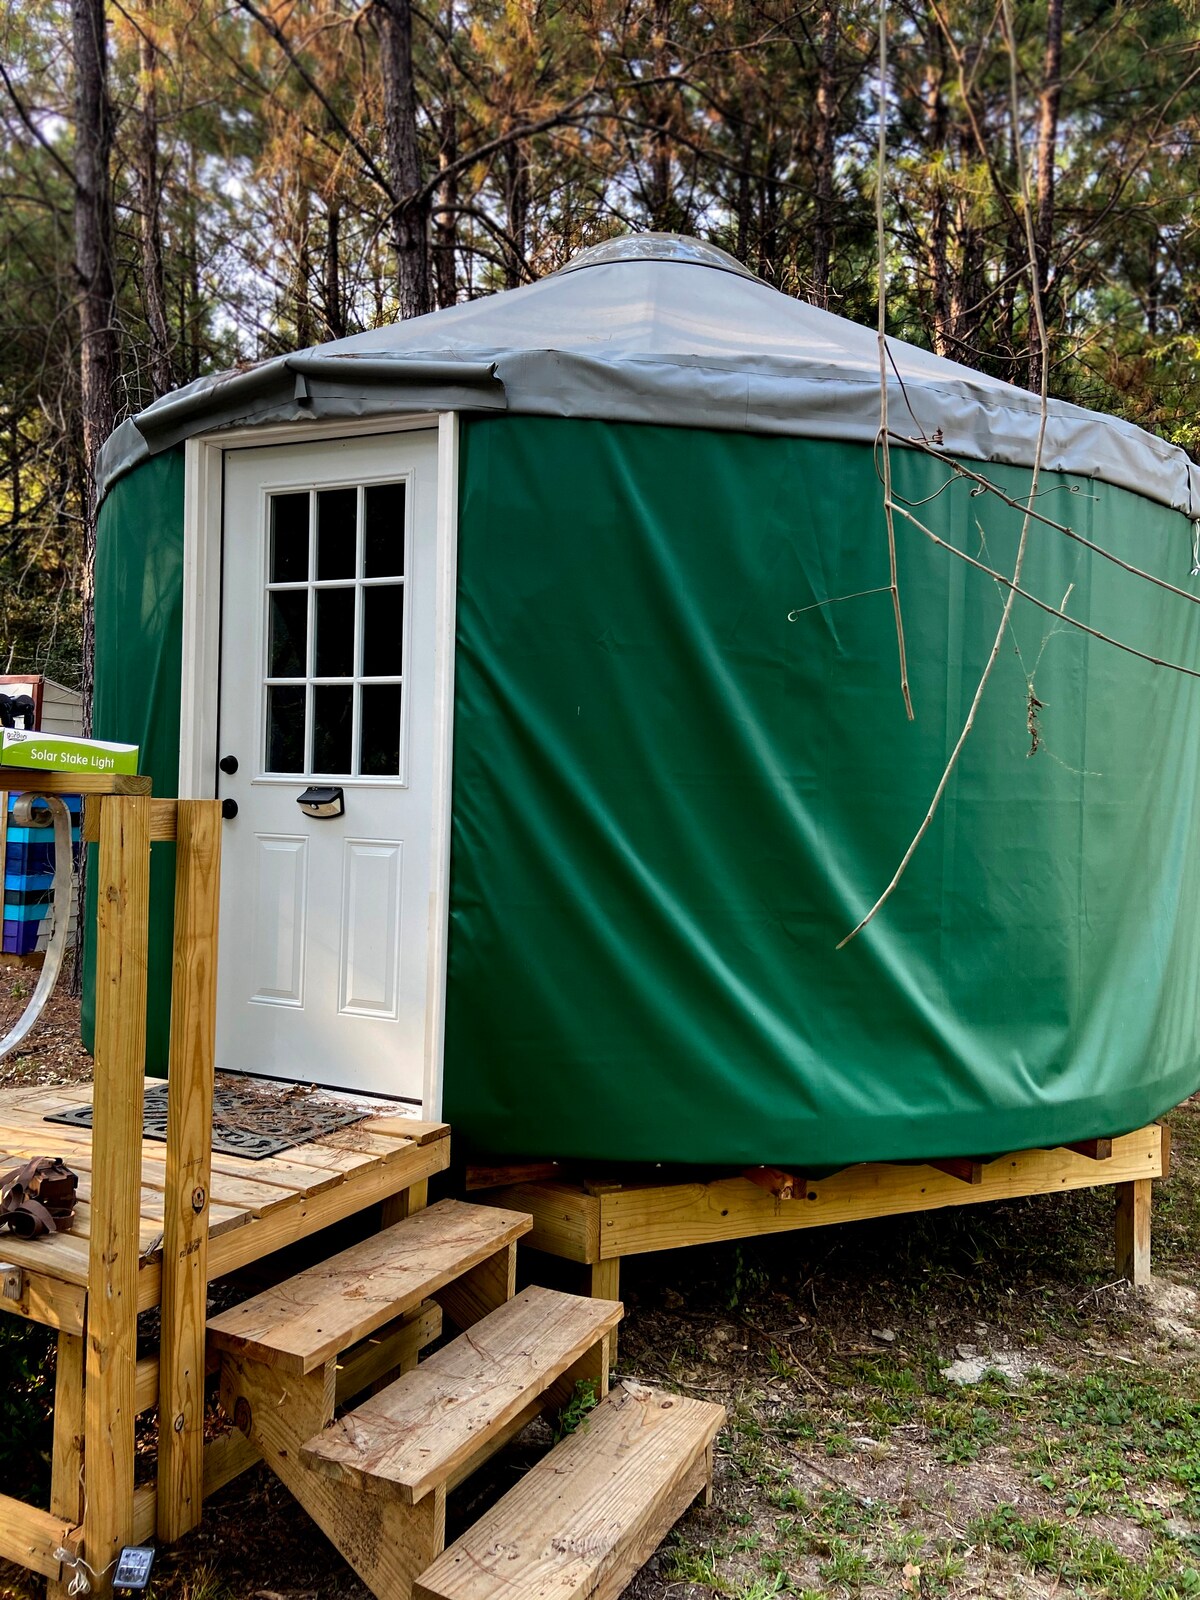 The Butterfly Yurt at River Bark